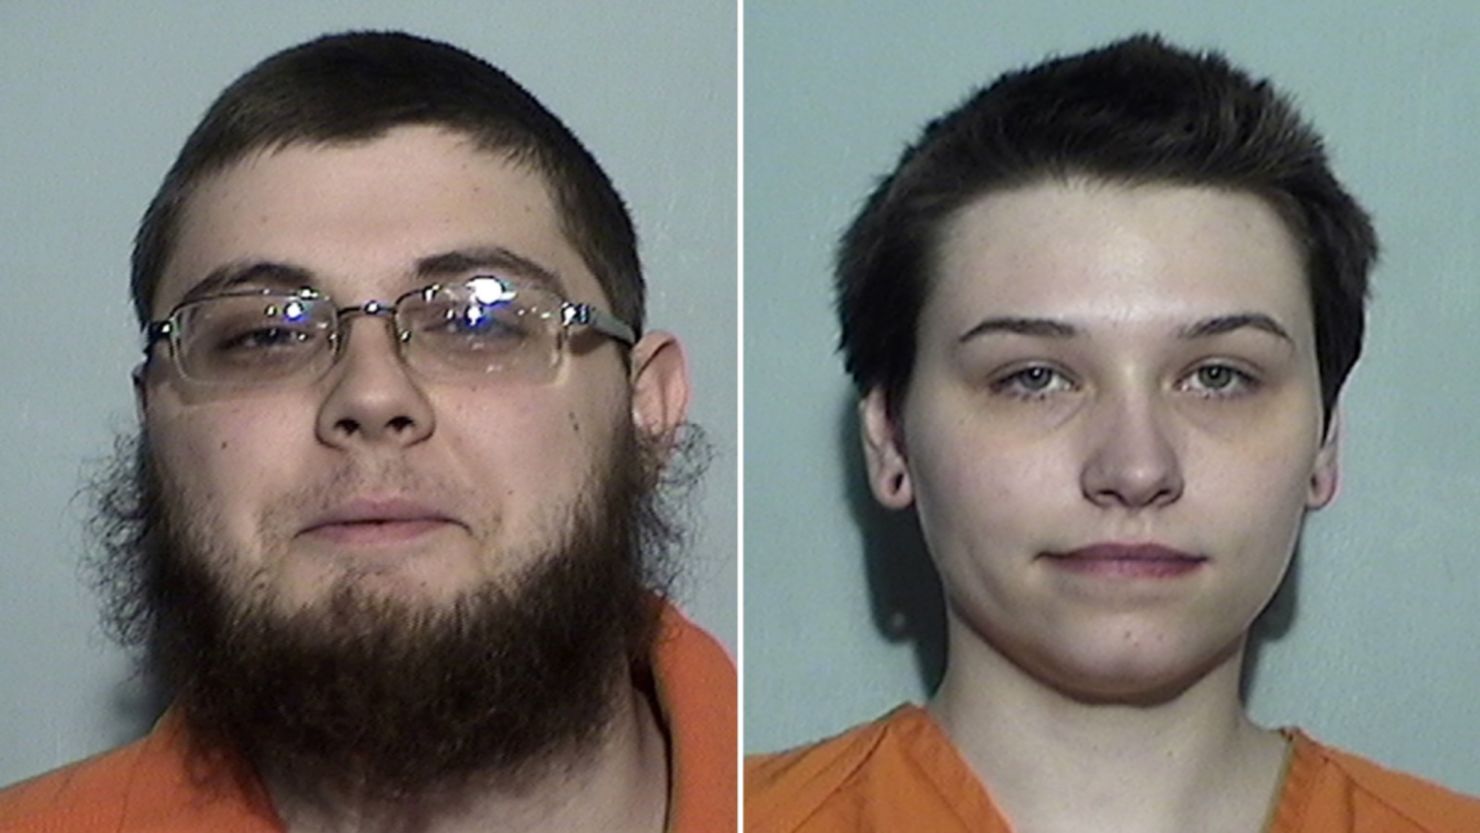 Authorities said Damon Joseph, 21, planned to kill worshipers inside a Jewish synagogue in Toledo with an assault rifle. In a second case, Elizabeth Lecron, 23, is accused of purchasing bomb-making materials she intended to use to blow up a pipeline.